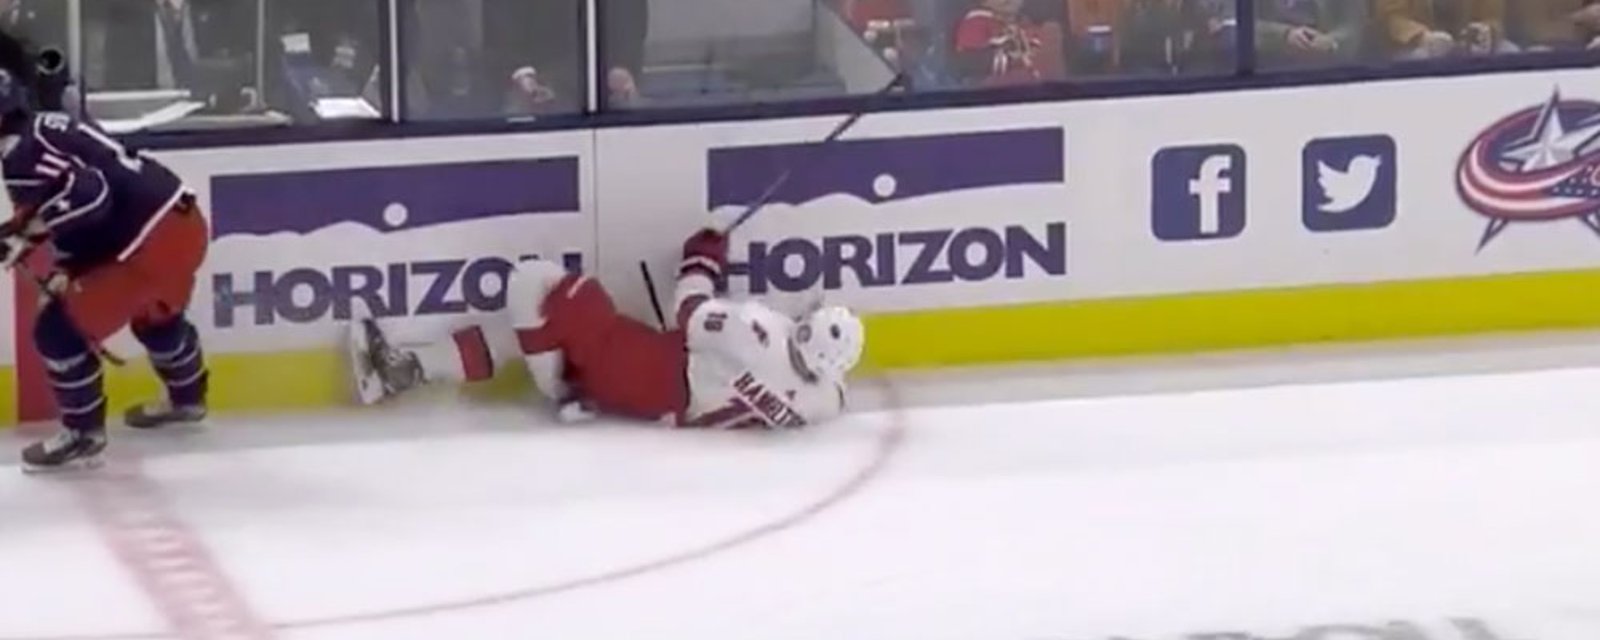 Dougie Hamilton falls awkwardly, folding his knee under him in the process